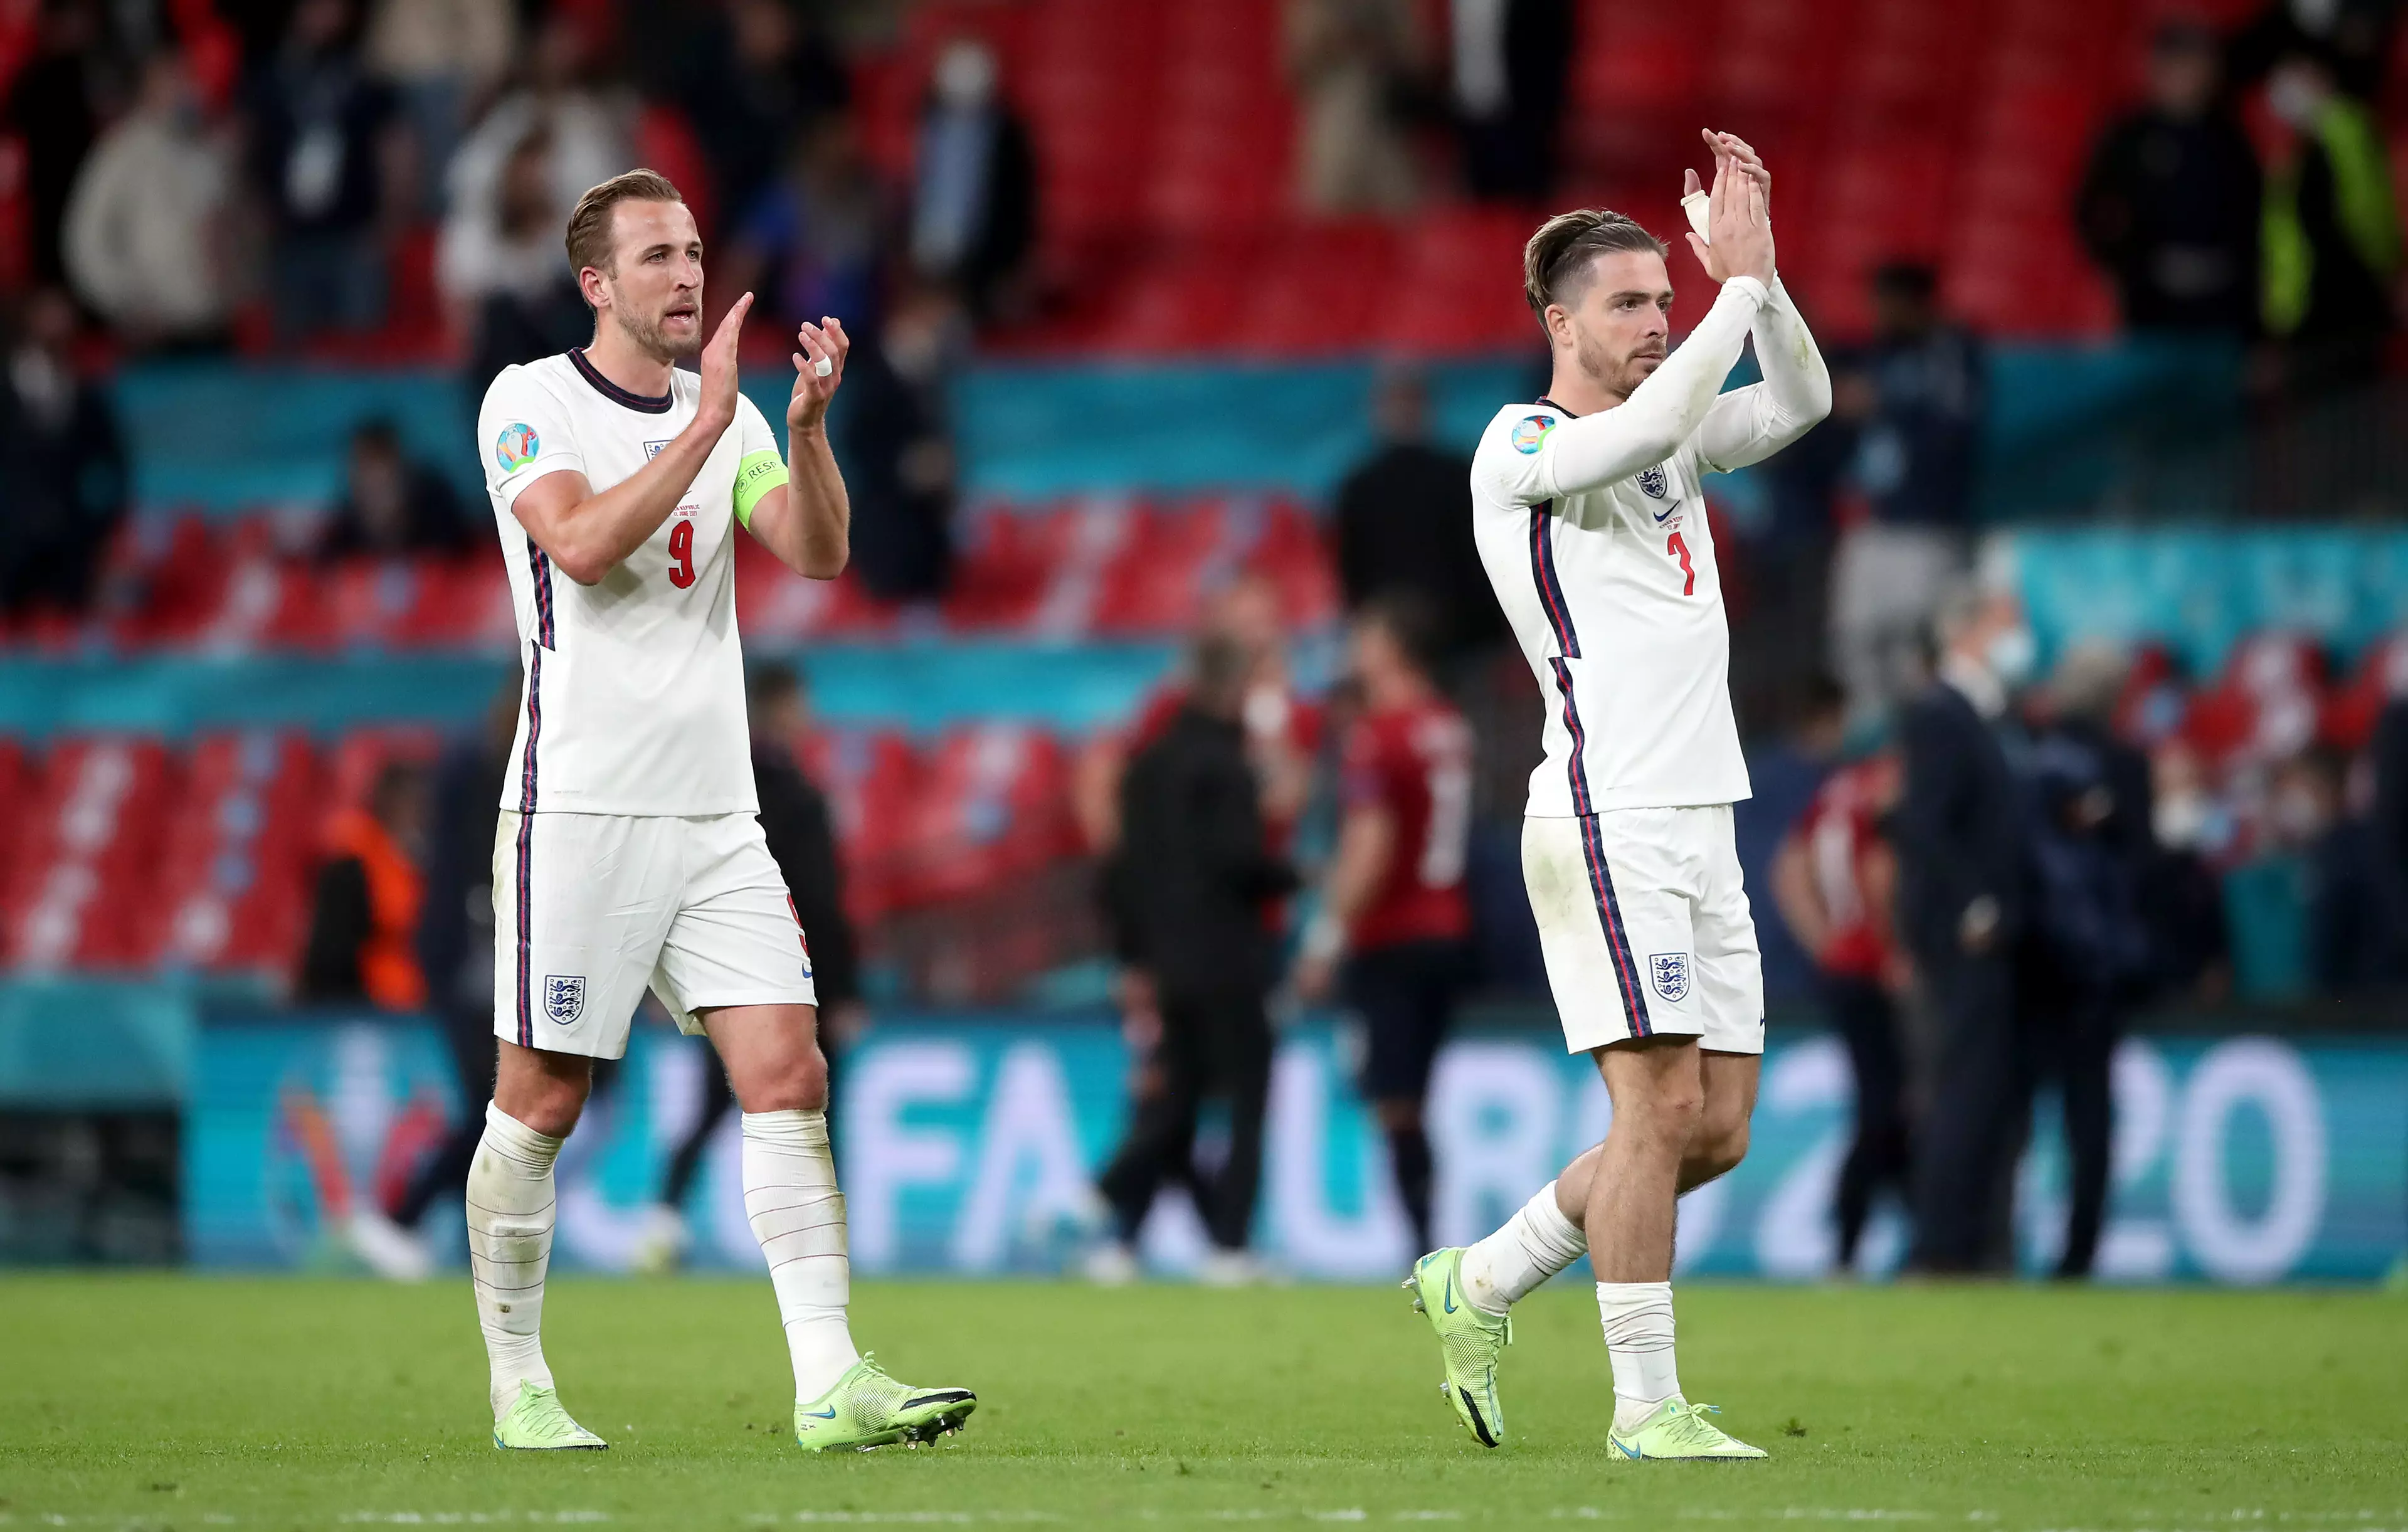 Kane and Grealish could be playing together at City soon. Image: PA Images